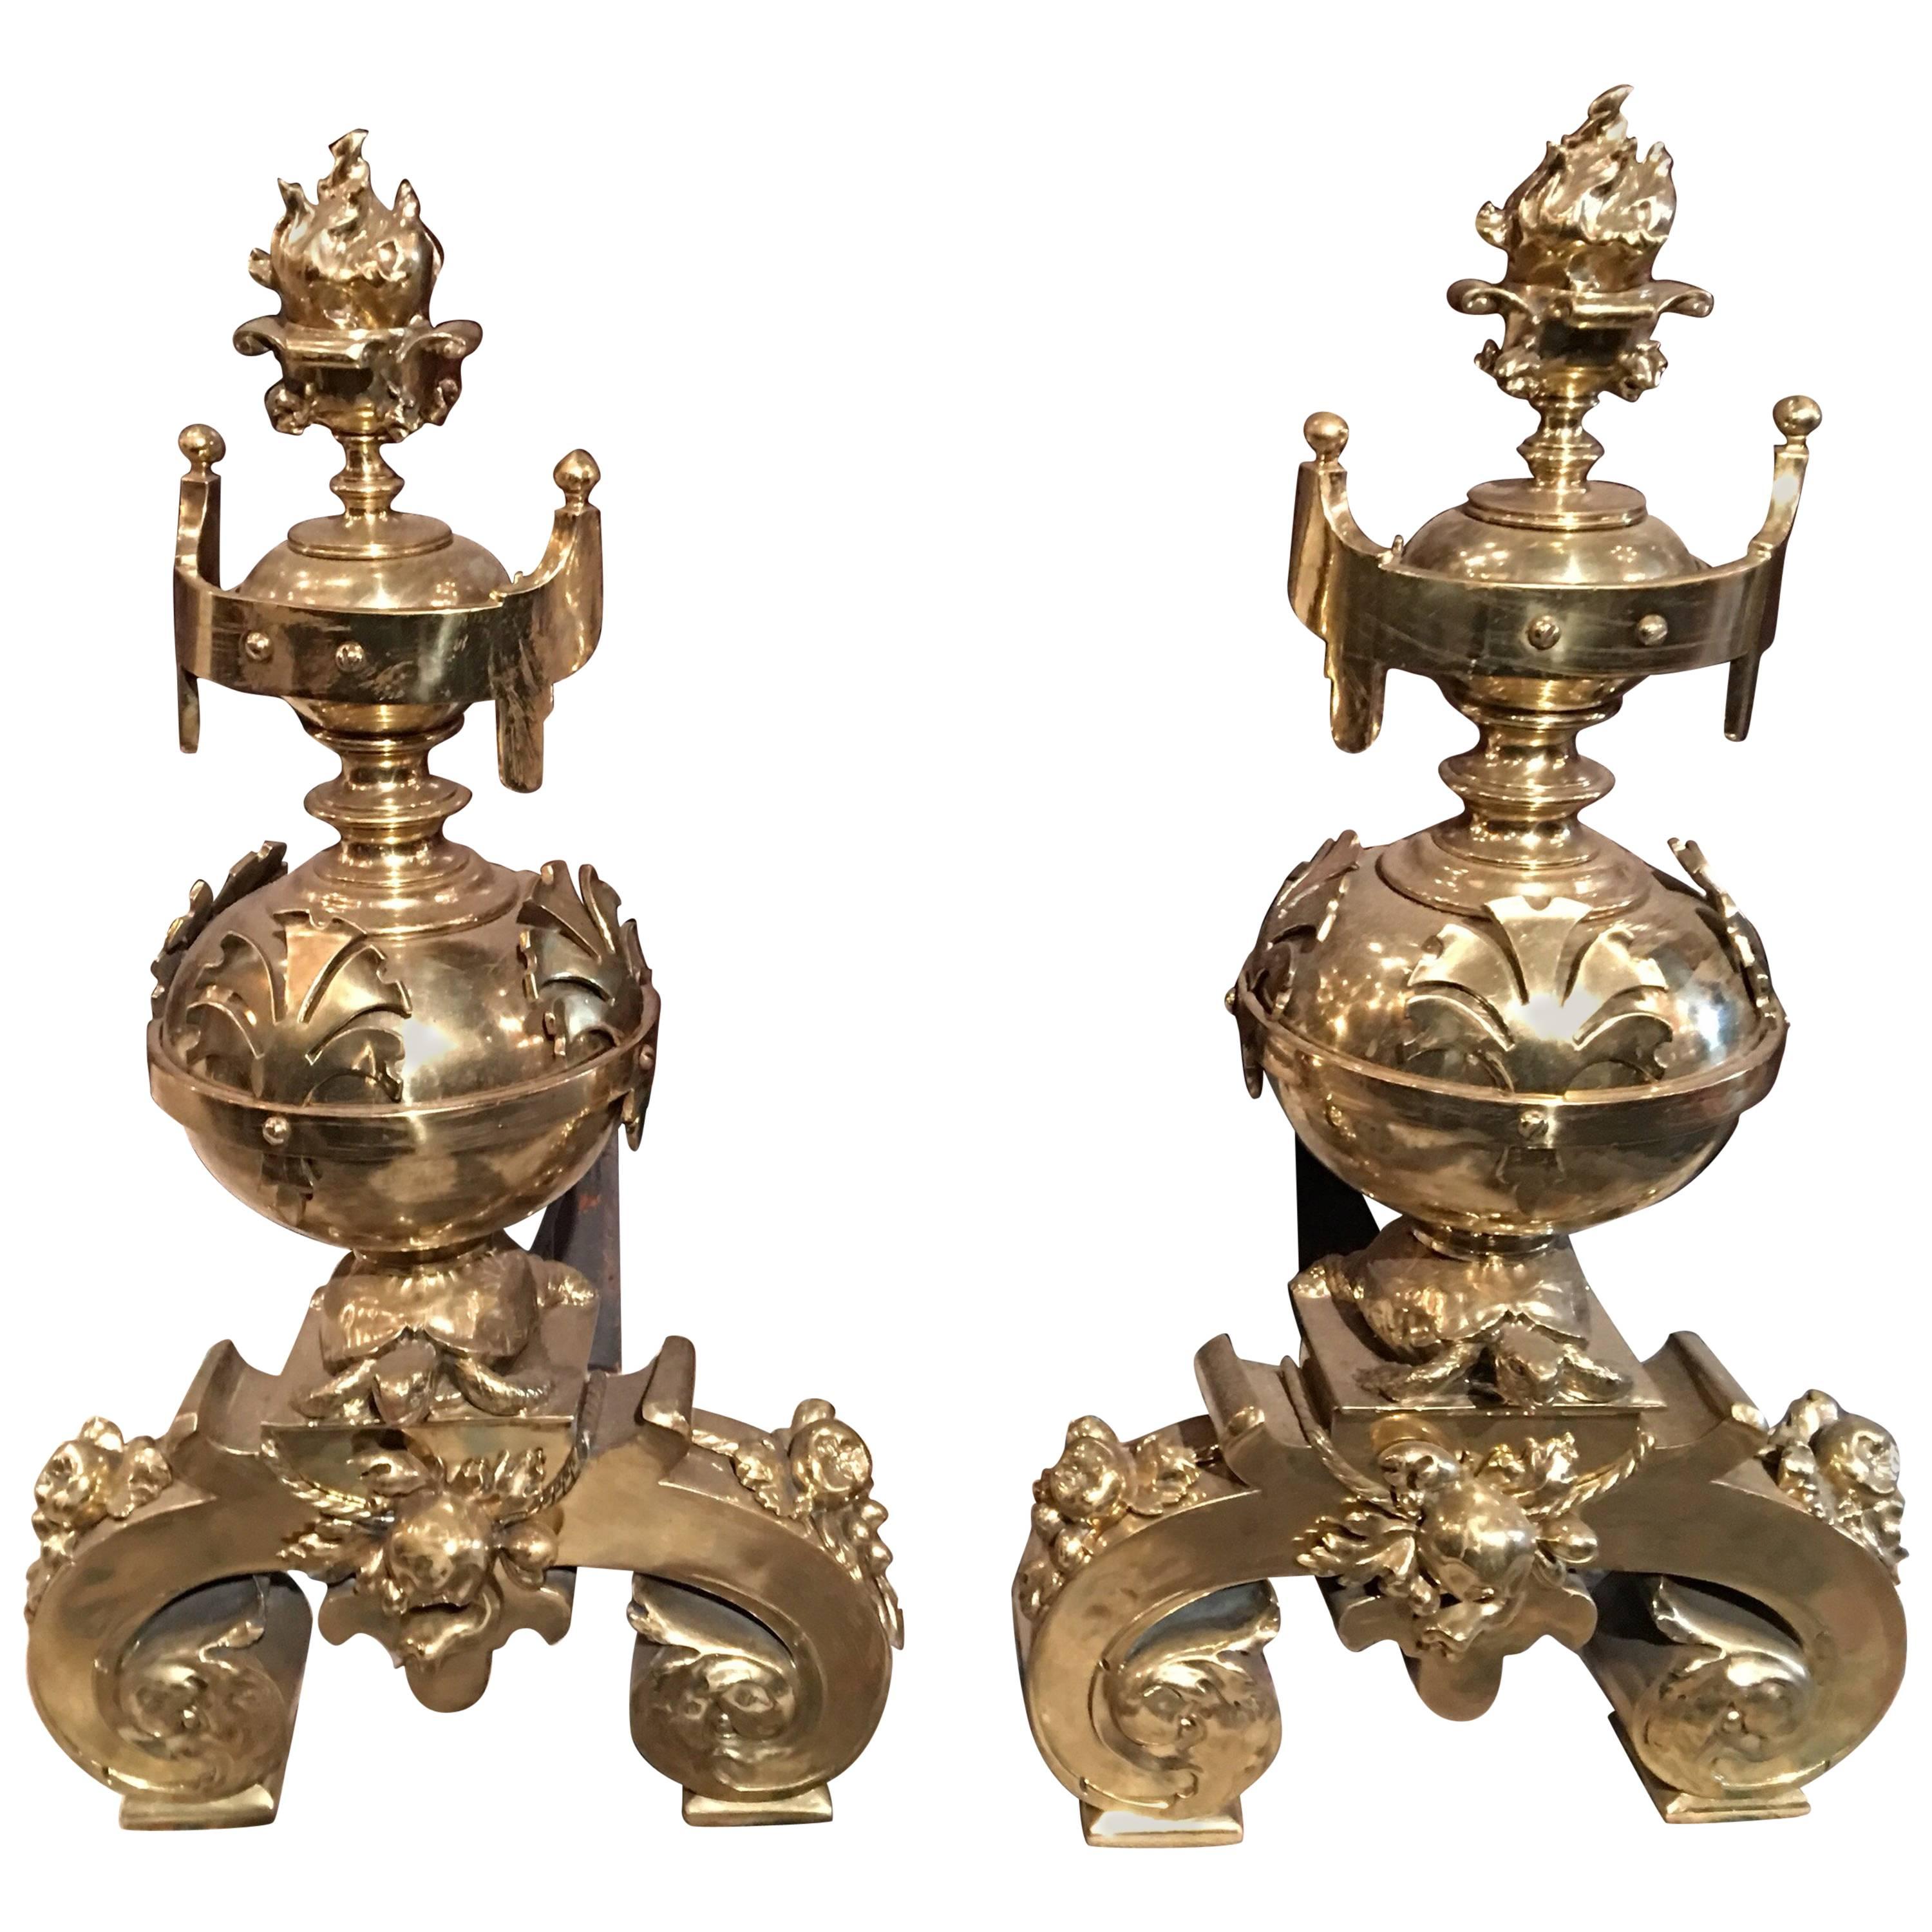 Pair of Polished Brass Chenets or Andirons with Flame Finials, 19th Century For Sale